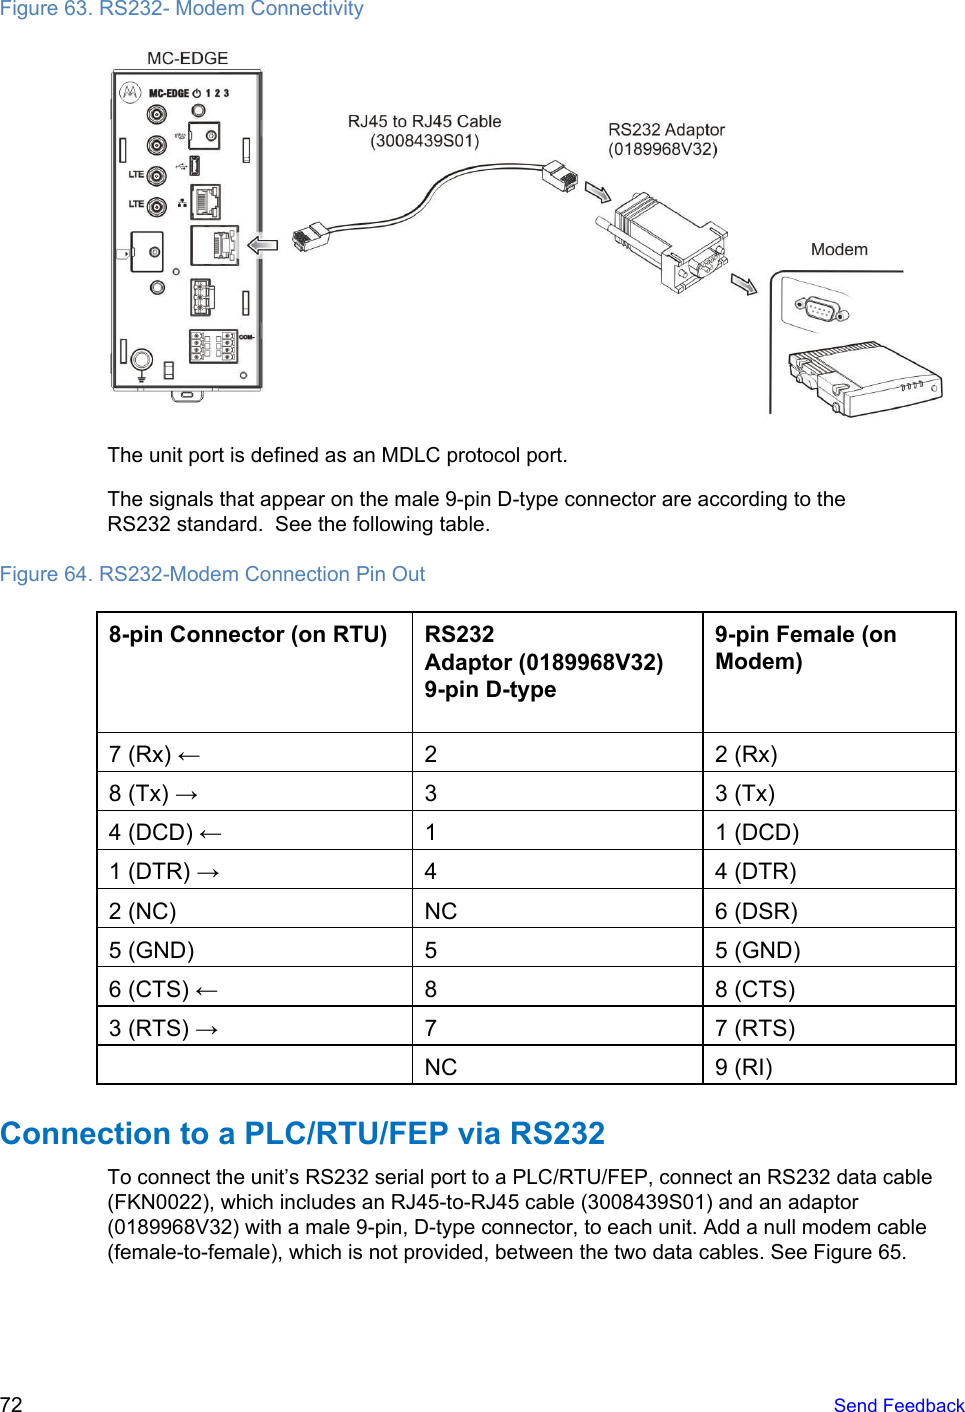  Figure 63. RS232- Modem Connectivity  The unit port is defined as an MDLC protocol port. The signals that appear on the male 9-pin D-type connector are according to the RS232 standard.  See the following table. Figure 64. RS232-Modem Connection Pin Out 8-pin Connector (on RTU) RS232 Adaptor (0189968V32) 9-pin D-type 9-pin Female (on Modem) 7 (Rx) ← 2 2 (Rx) 8 (Tx) → 3 3 (Tx) 4 (DCD) ← 1 1 (DCD) 1 (DTR) → 4 4 (DTR) 2 (NC) NC 6 (DSR) 5 (GND) 5 5 (GND) 6 (CTS) ← 8 8 (CTS) 3 (RTS) → 7 7 (RTS) NC 9 (RI) Connection to a PLC/RTU/FEP via RS232 To connect the unit’s RS232 serial port to a PLC/RTU/FEP, connect an RS232 data cable (FKN0022), which includes an RJ45-to-RJ45 cable (3008439S01) and an adaptor (0189968V32) with a male 9-pin, D-type connector, to each unit. Add a null modem cable (female-to-female), which is not provided, between the two data cables. See Figure 65.  72   Send Feedback  